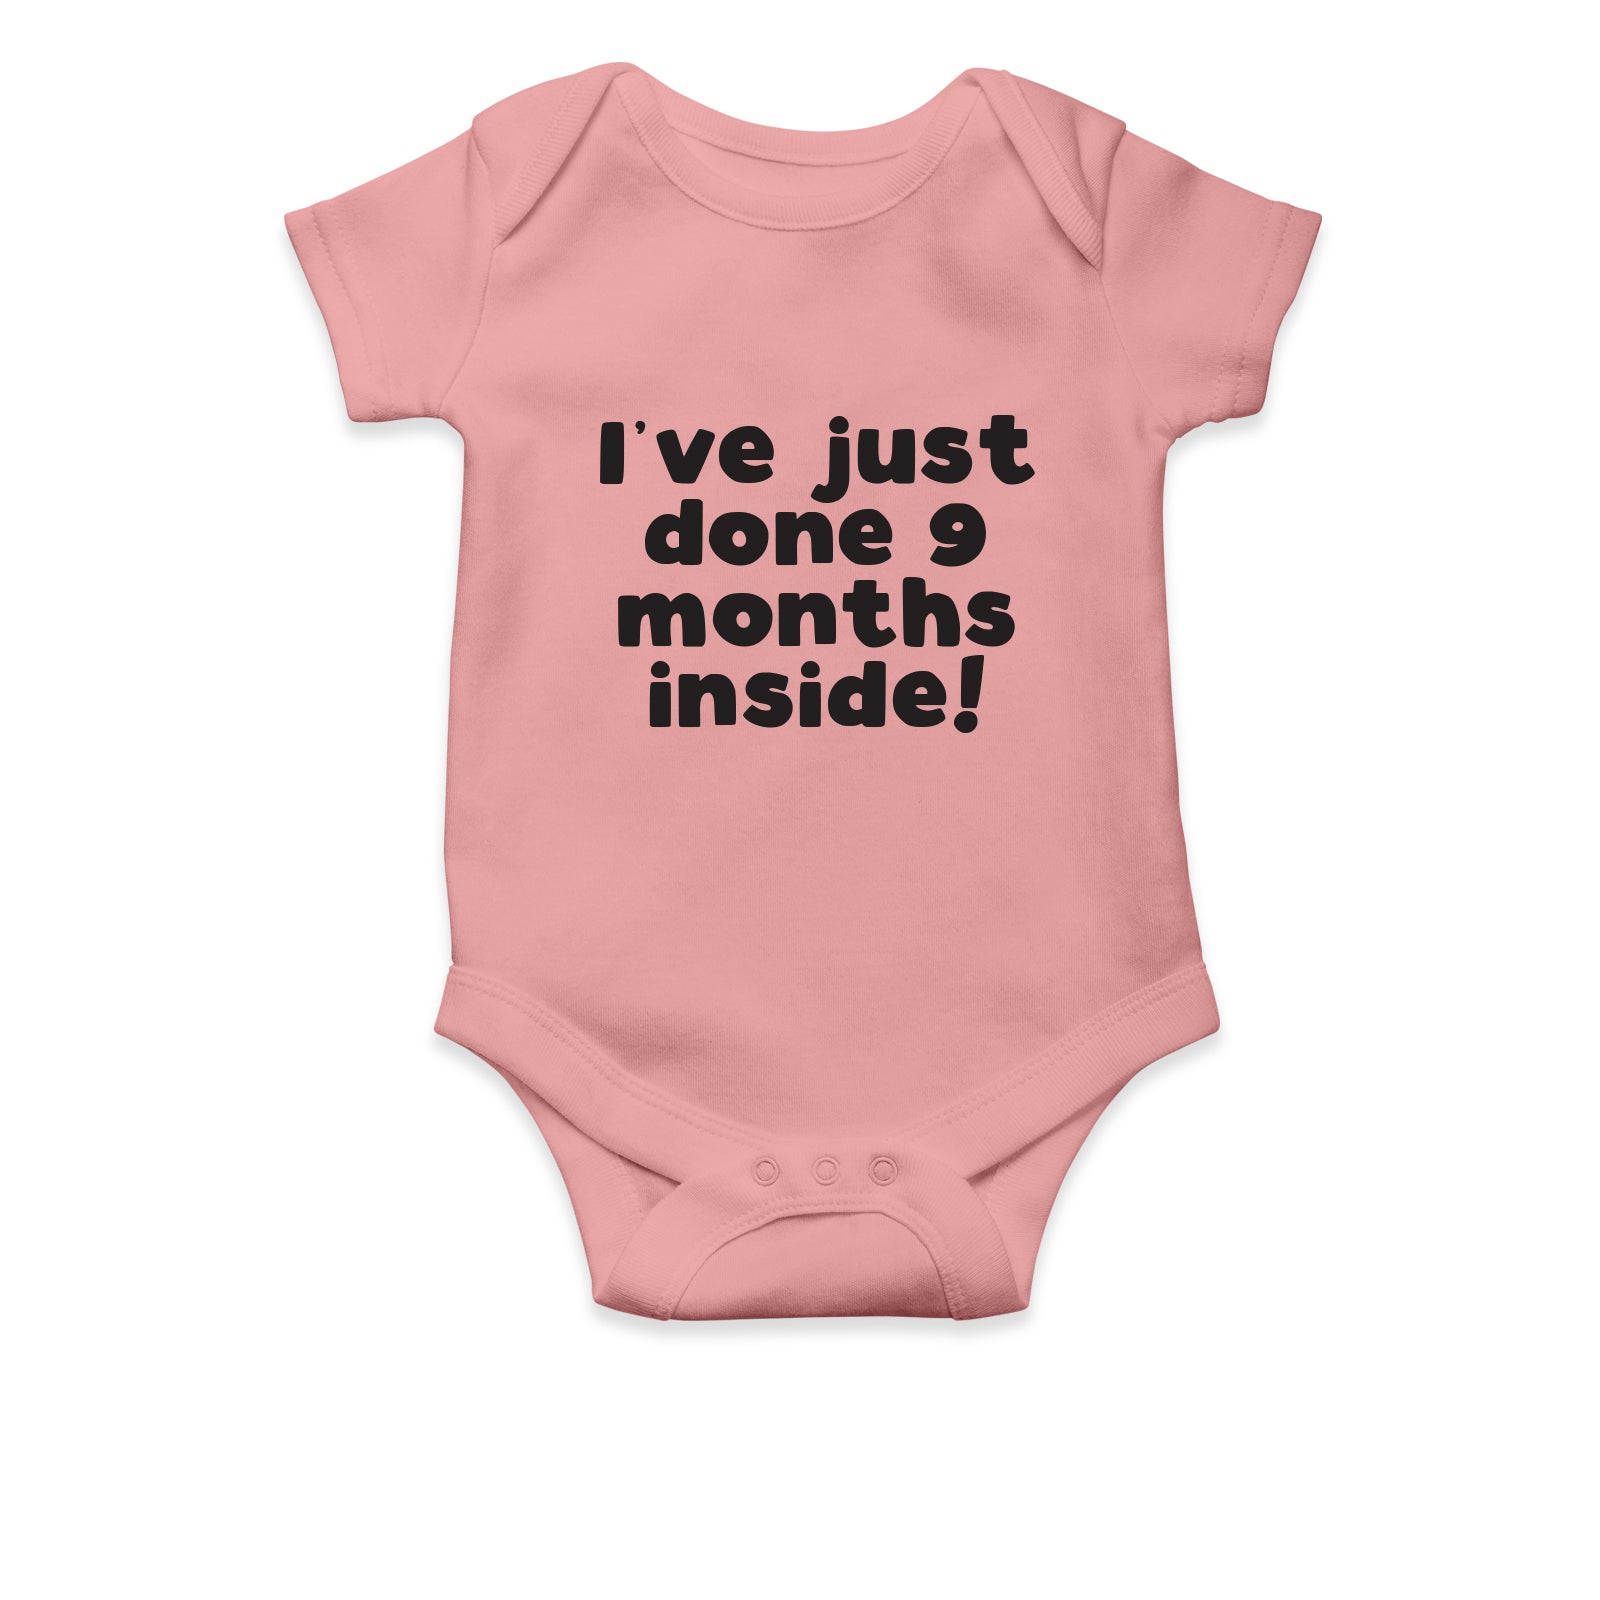 Personalised White Baby Body Suit Grow Vest - Prison Time